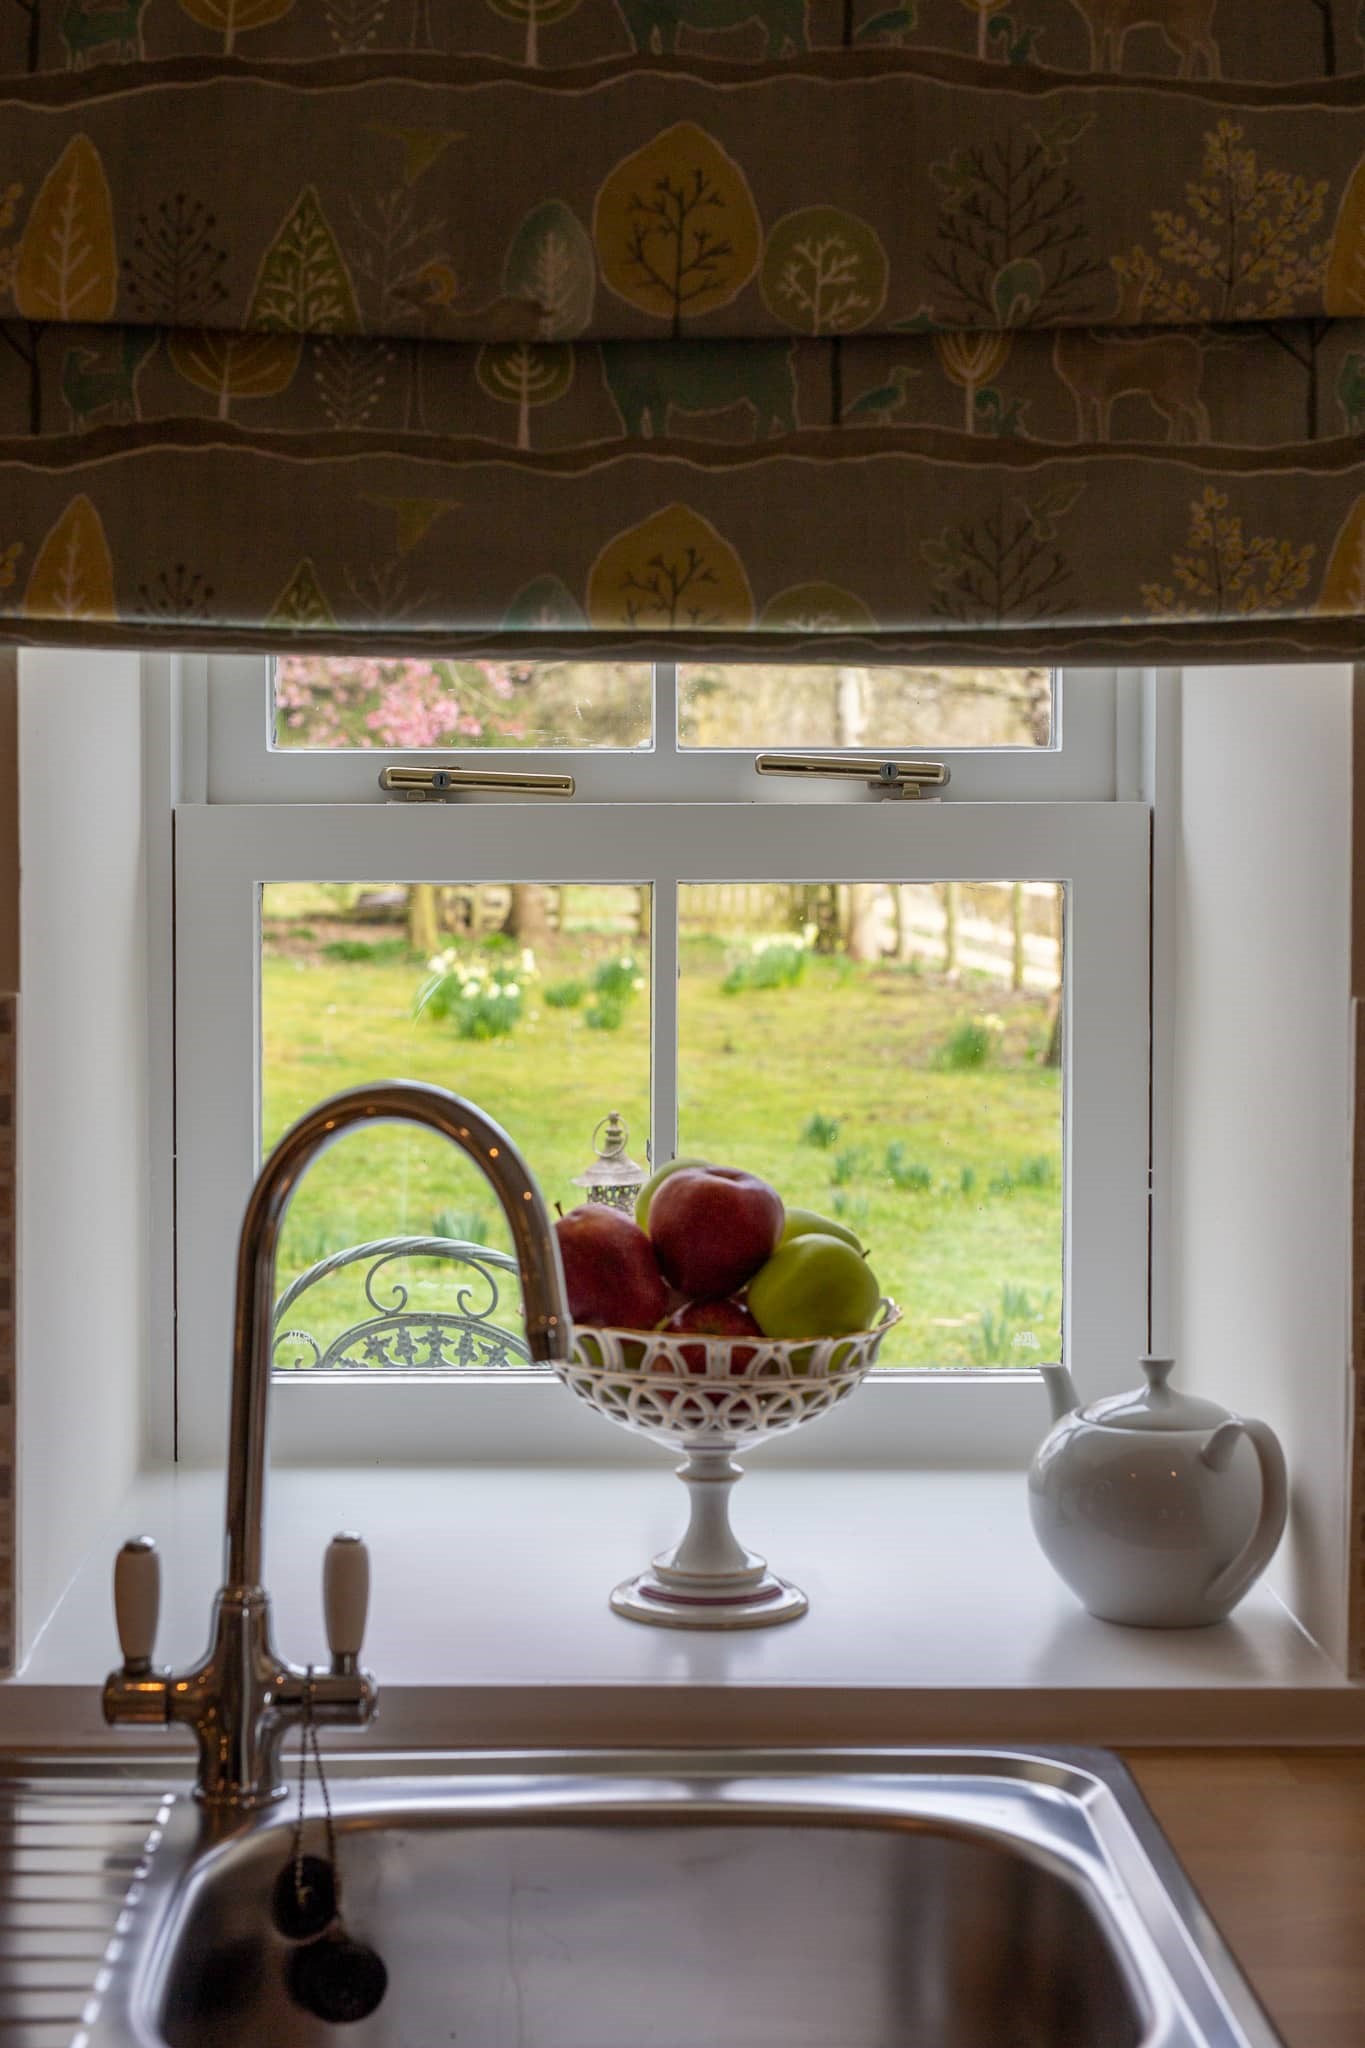 Woodman's Cottage - view from the kitchen overlooking the garden